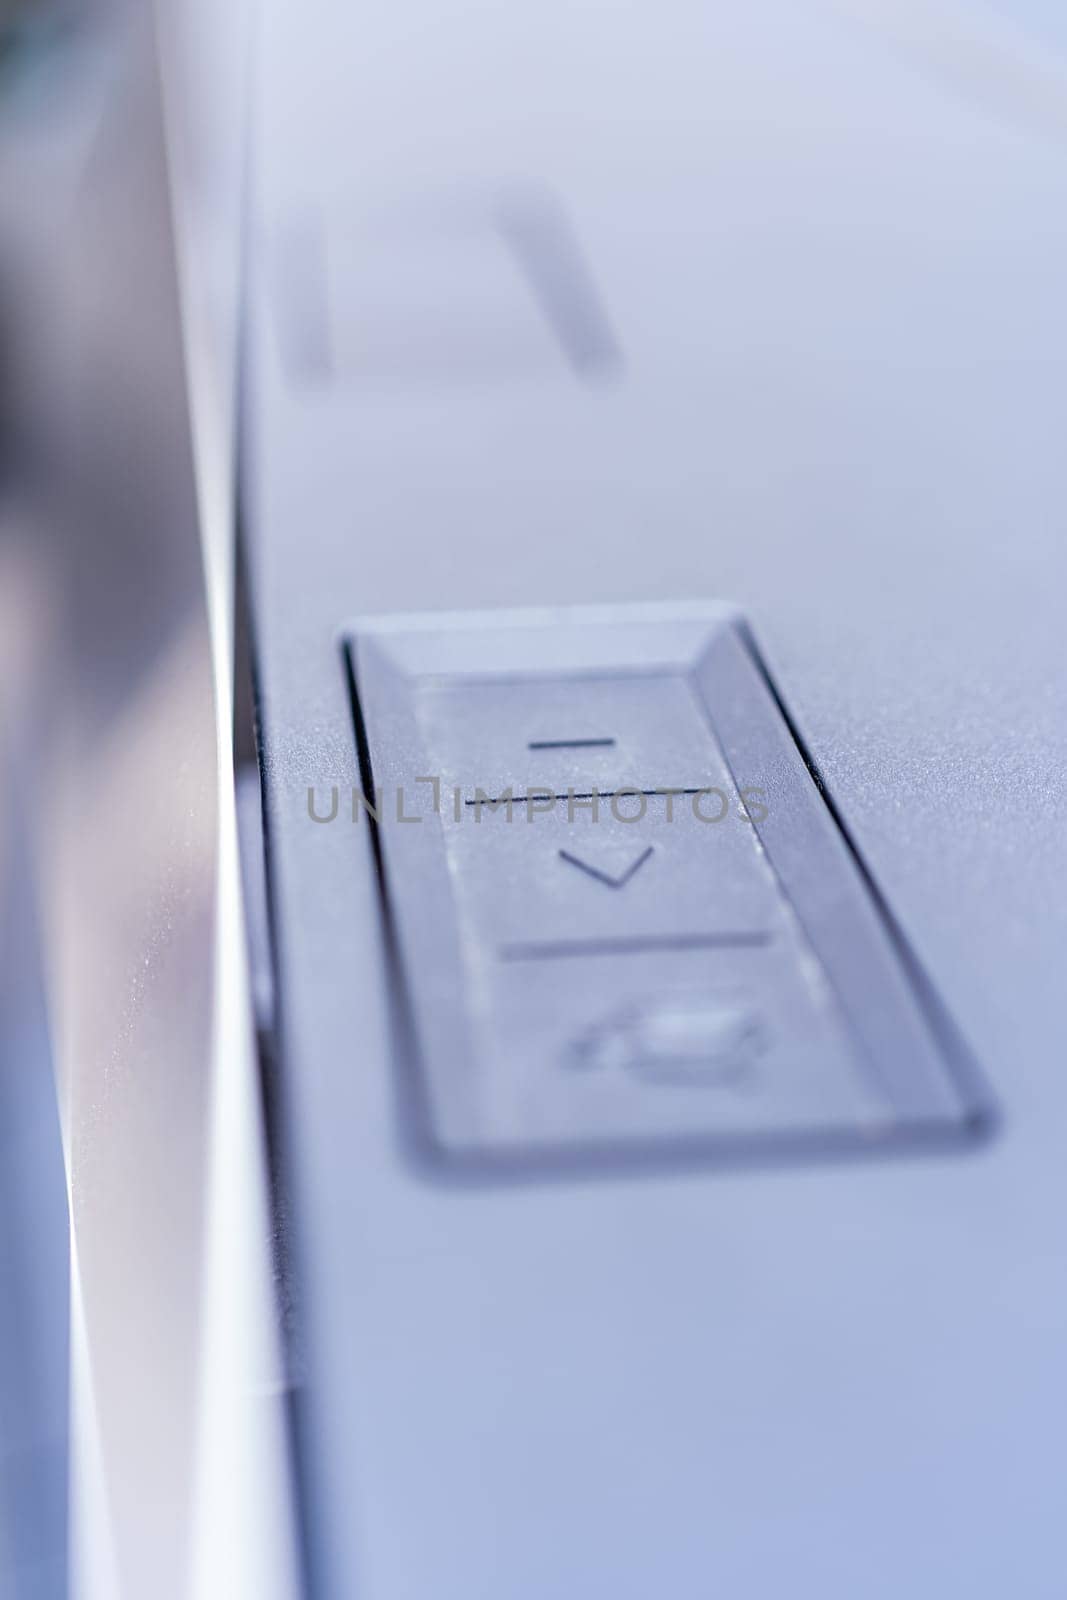 Denver, Colorado, USA-May 5, 2024-This image captures a close-up view of the control buttons used for operating the tailgate and tonneau cover of a Tesla Cybertruck, highlighting the futuristic and functional design elements.